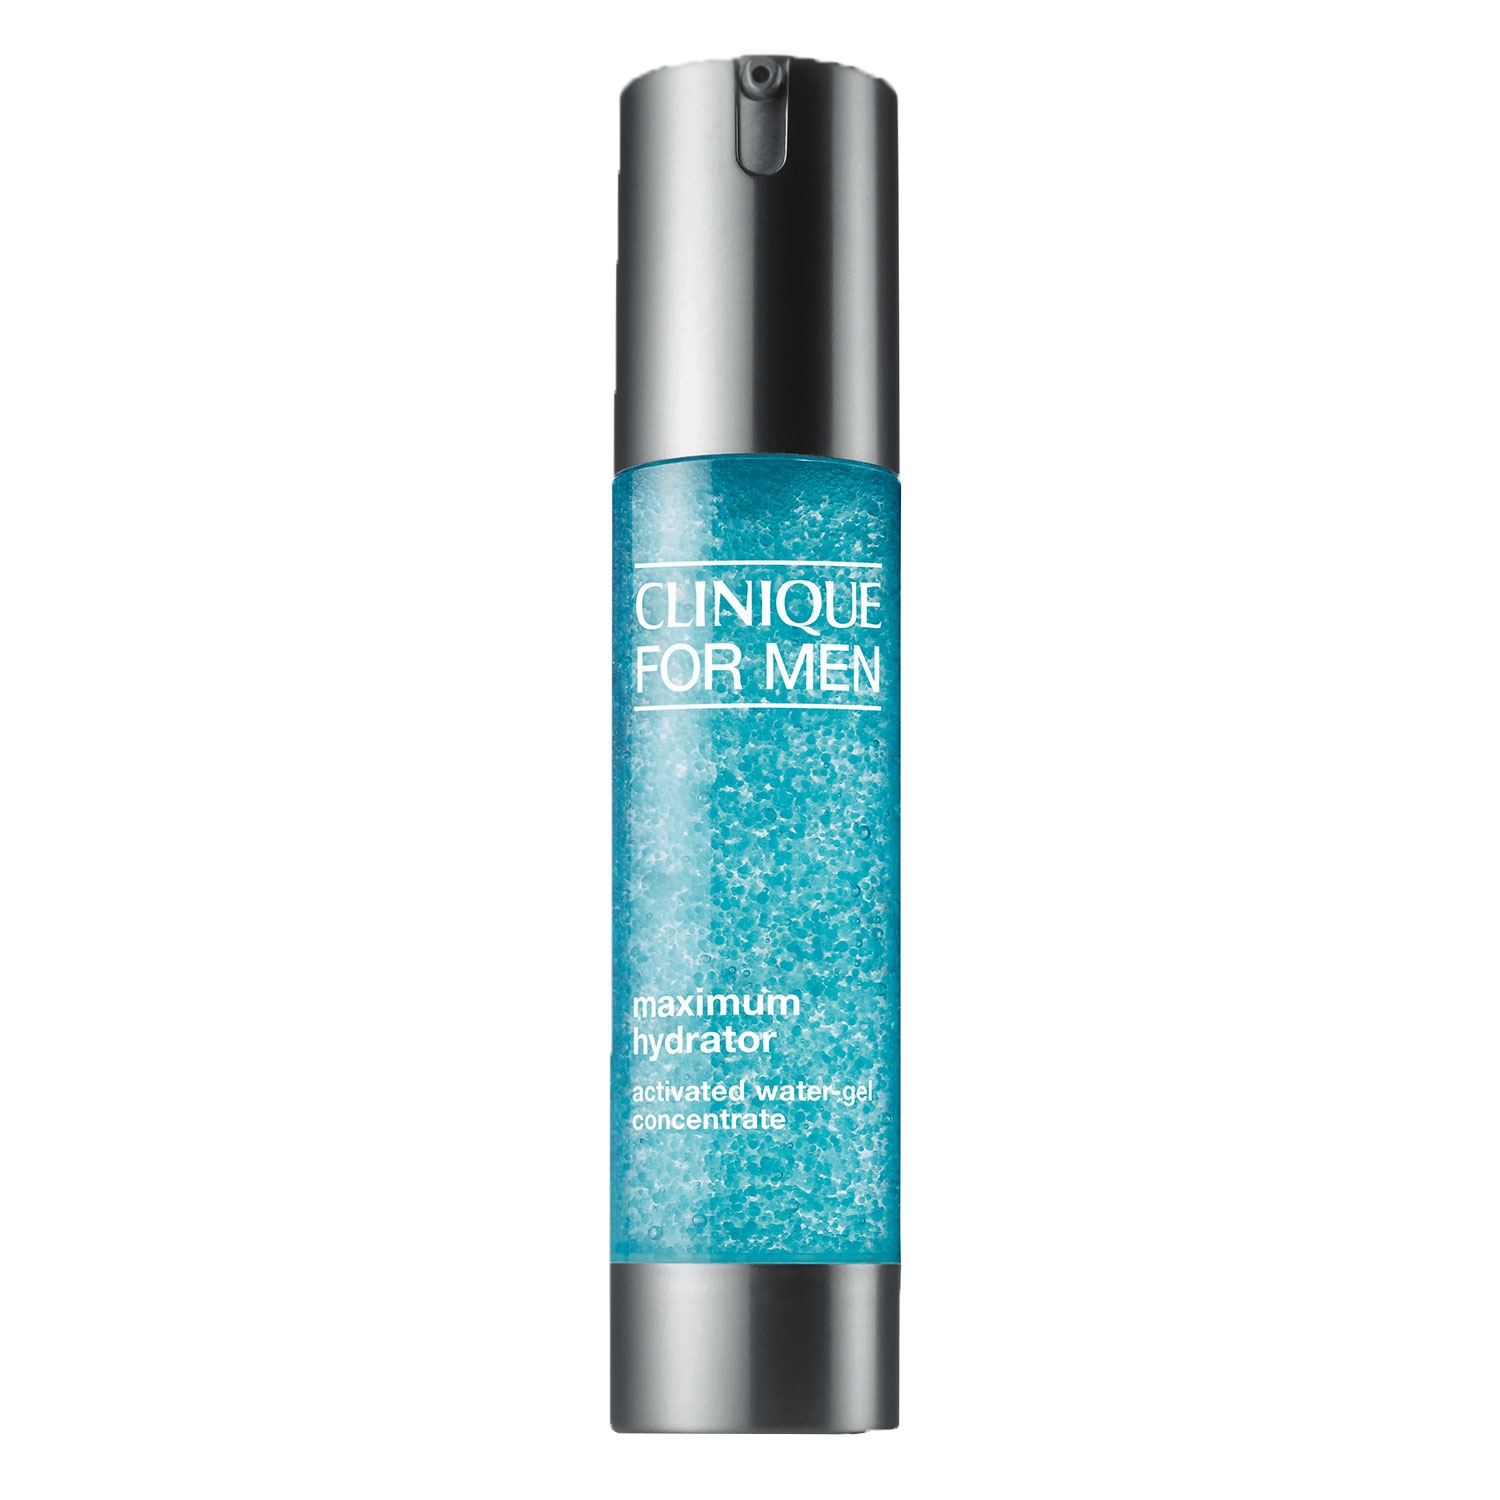 Product image from Clinique For Men - Maximum Hydrator Activated Water-Gel Concentrate